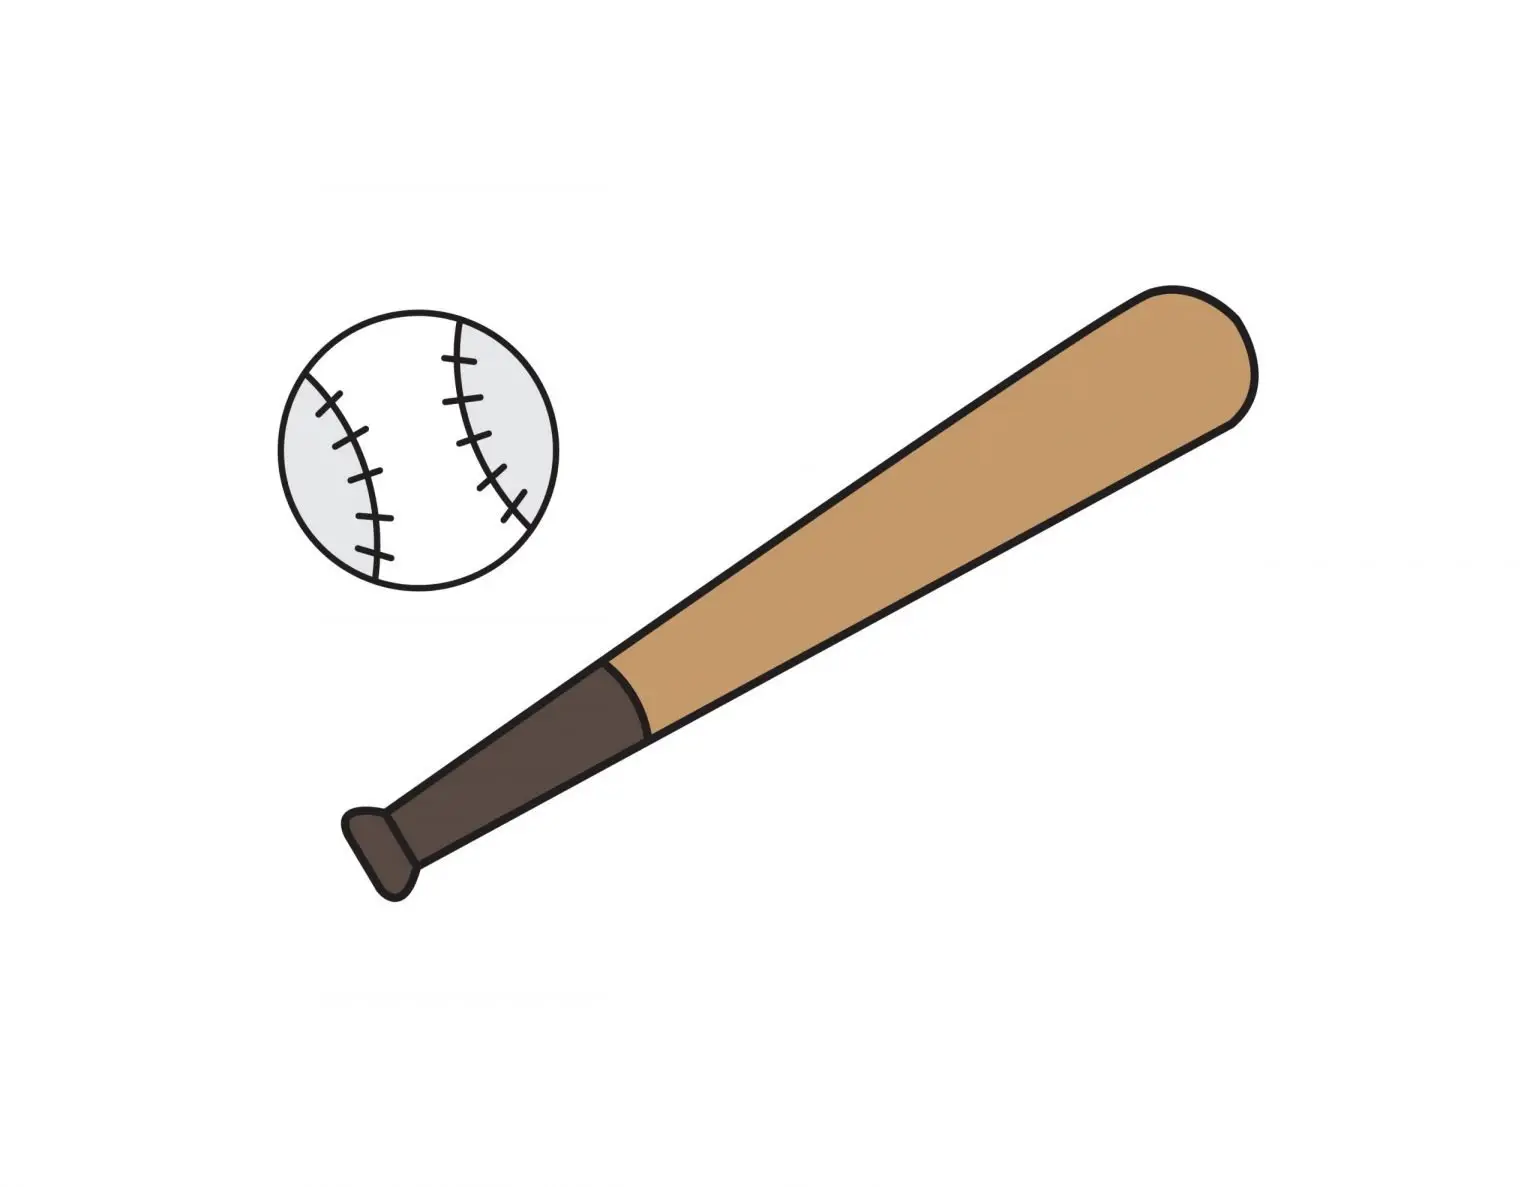 Step-by-step guide to drawing a baseball bat